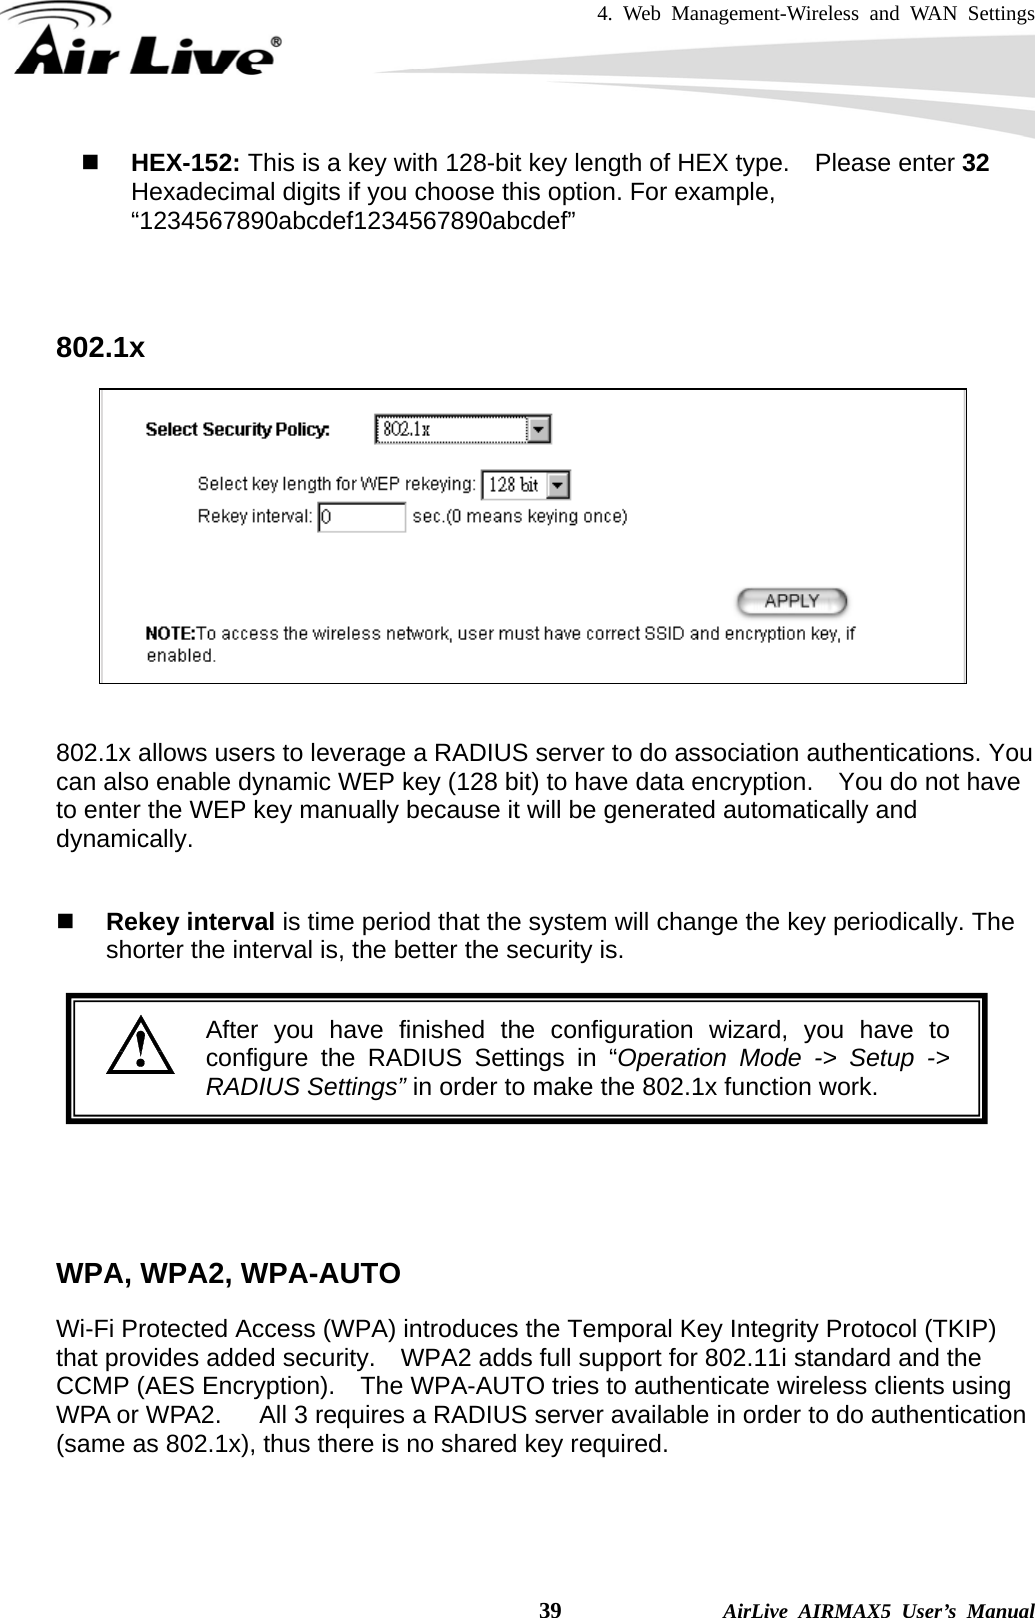 4. Web Management-Wireless and WAN Settings    39              AirLive AIRMAX5 User’s Manual  HEX-152: This is a key with 128-bit key length of HEX type.    Please enter 32 Hexadecimal digits if you choose this option. For example, “1234567890abcdef1234567890abcdef”   802.1x    802.1x allows users to leverage a RADIUS server to do association authentications. You can also enable dynamic WEP key (128 bit) to have data encryption.    You do not have to enter the WEP key manually because it will be generated automatically and dynamically.    Rekey interval is time period that the system will change the key periodically. The shorter the interval is, the better the security is.   After you have finished the configuration wizard, you have to configure the RADIUS Settings in “Operation Mode -&gt; Setup -&gt;RADIUS Settings” in order to make the 802.1x function work.      WPA, WPA2, WPA-AUTO Wi-Fi Protected Access (WPA) introduces the Temporal Key Integrity Protocol (TKIP) that provides added security.    WPA2 adds full support for 802.11i standard and the CCMP (AES Encryption).    The WPA-AUTO tries to authenticate wireless clients using WPA or WPA2.      All 3 requires a RADIUS server available in order to do authentication (same as 802.1x), thus there is no shared key required.    